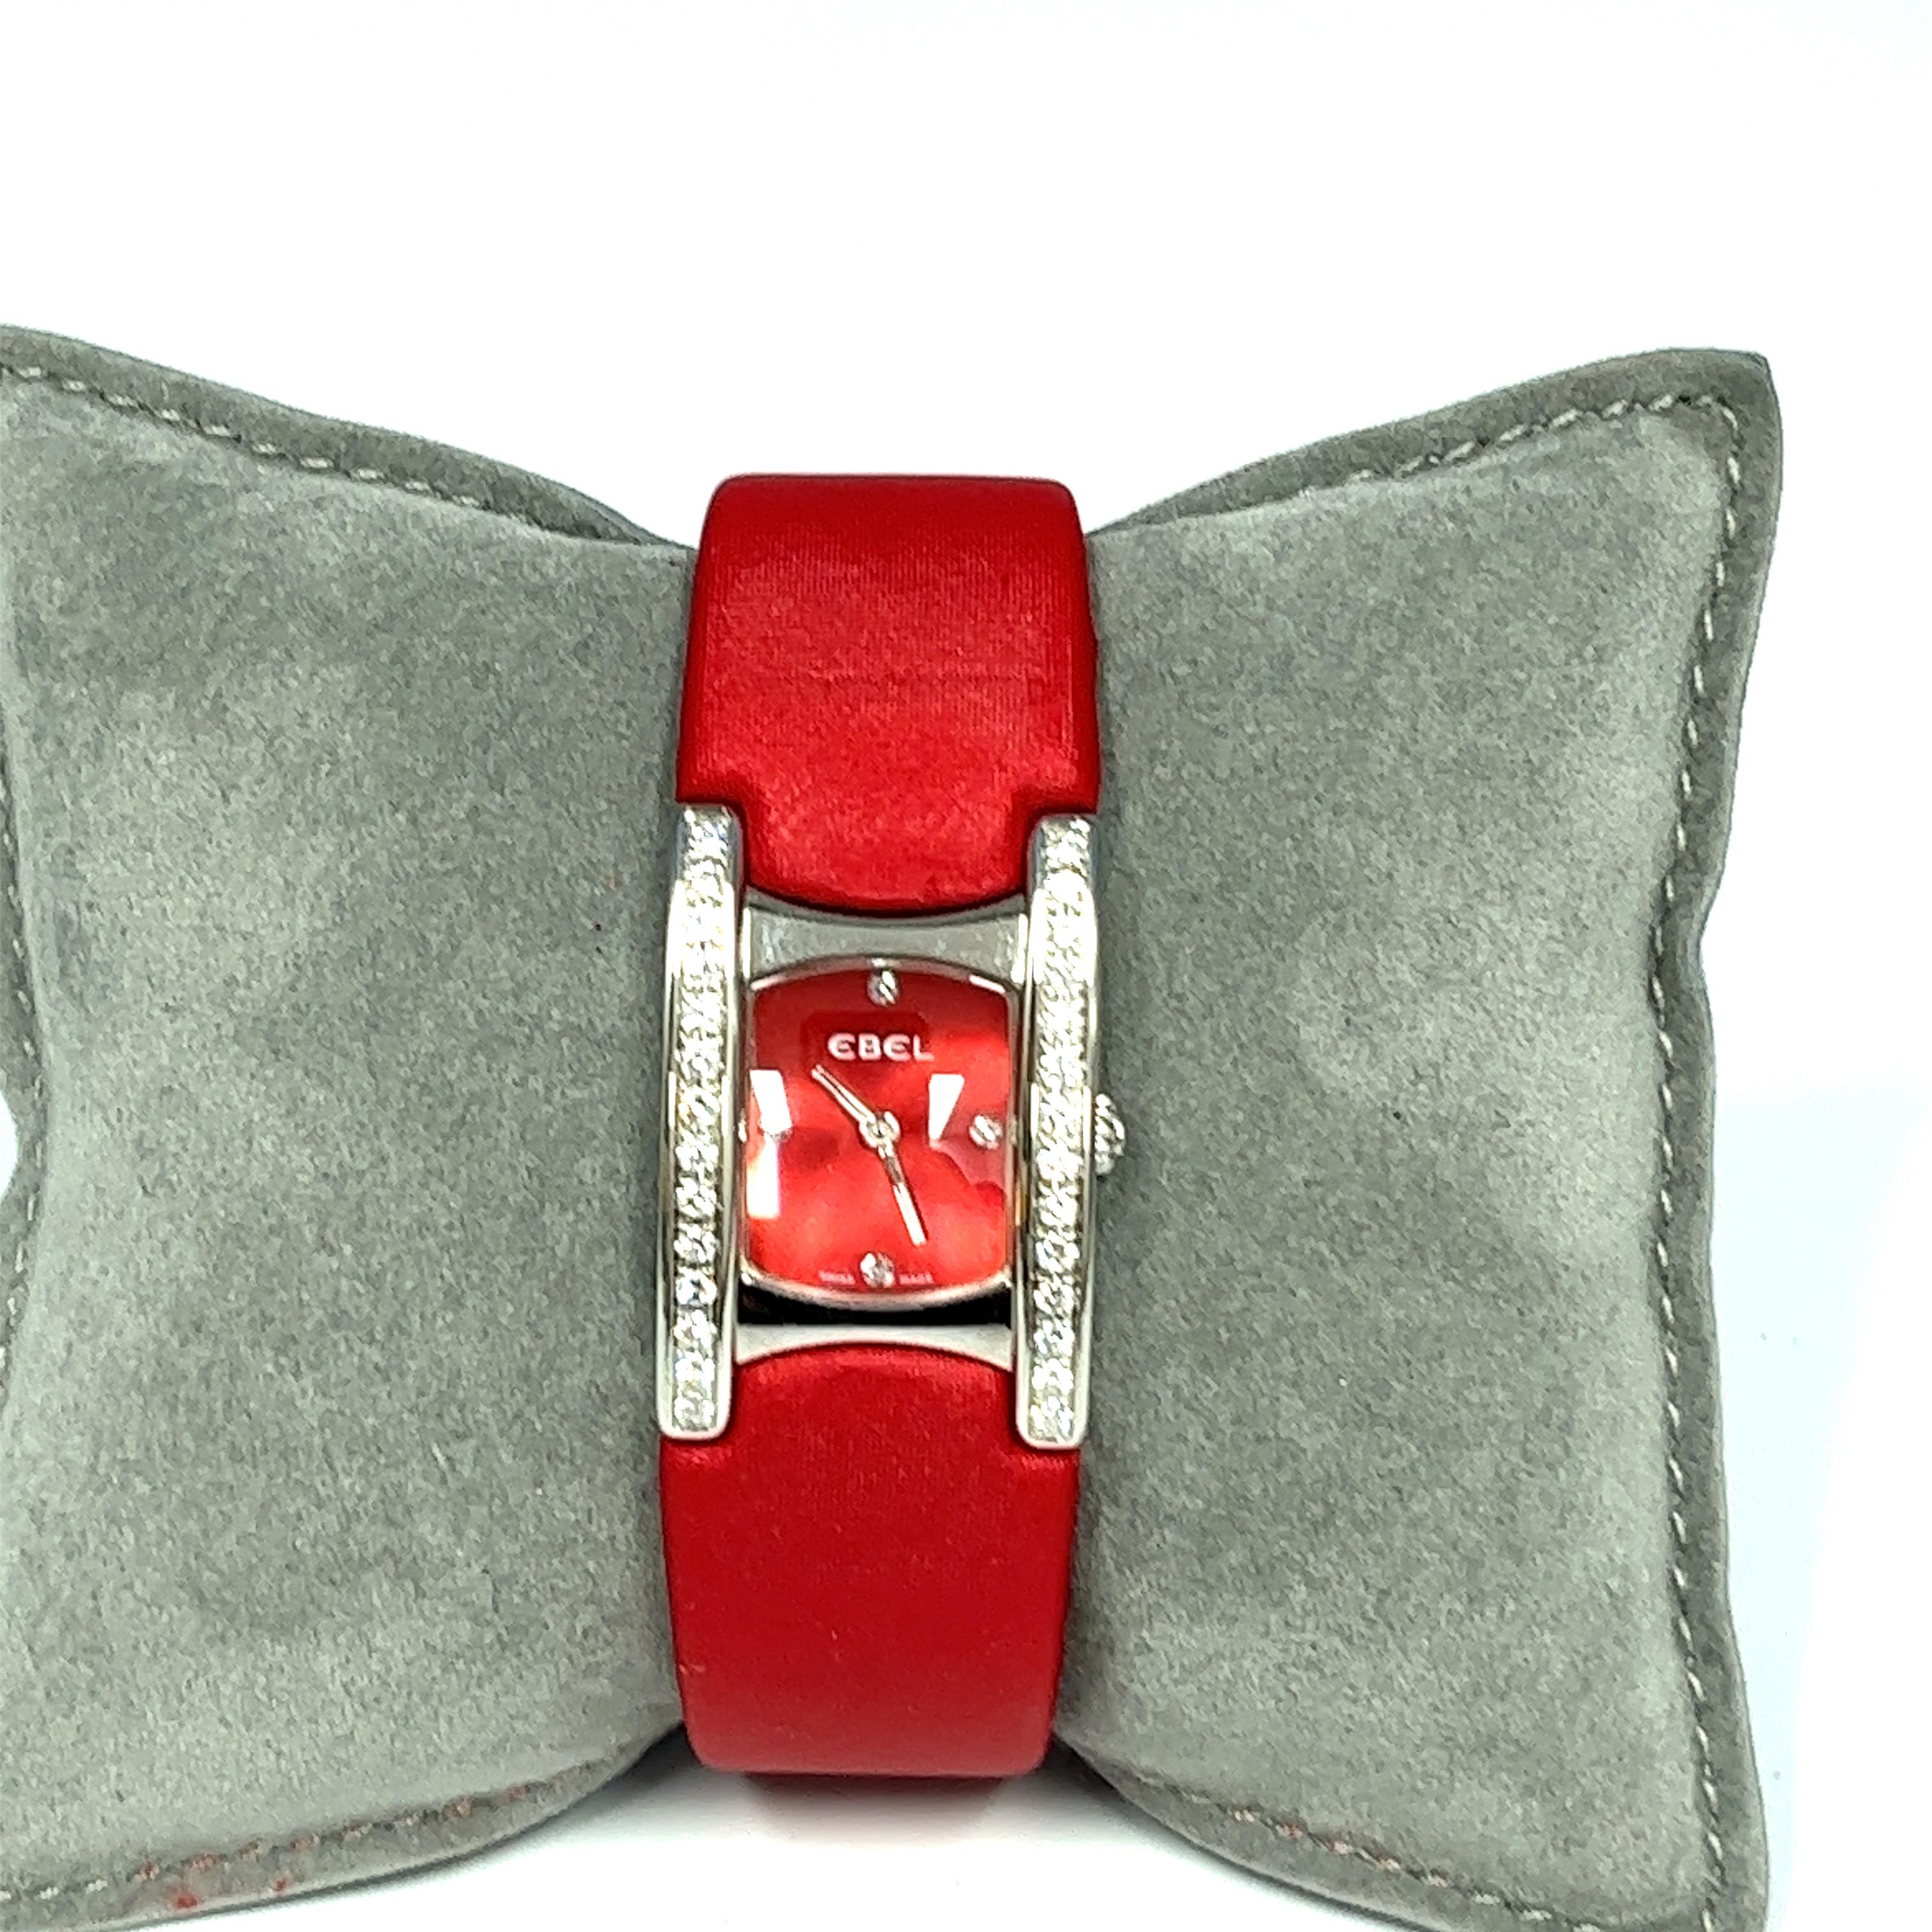 Ebel is a Swiss luxury watch company and was founded in 1911 in Switzerland. This beautiful pre owned Ebel Beluga E 9057A28-10 has a stainless steel case with a red dial. It has stainless steel hands and diamond numeral markers at 12, 3, 6 and 9. It